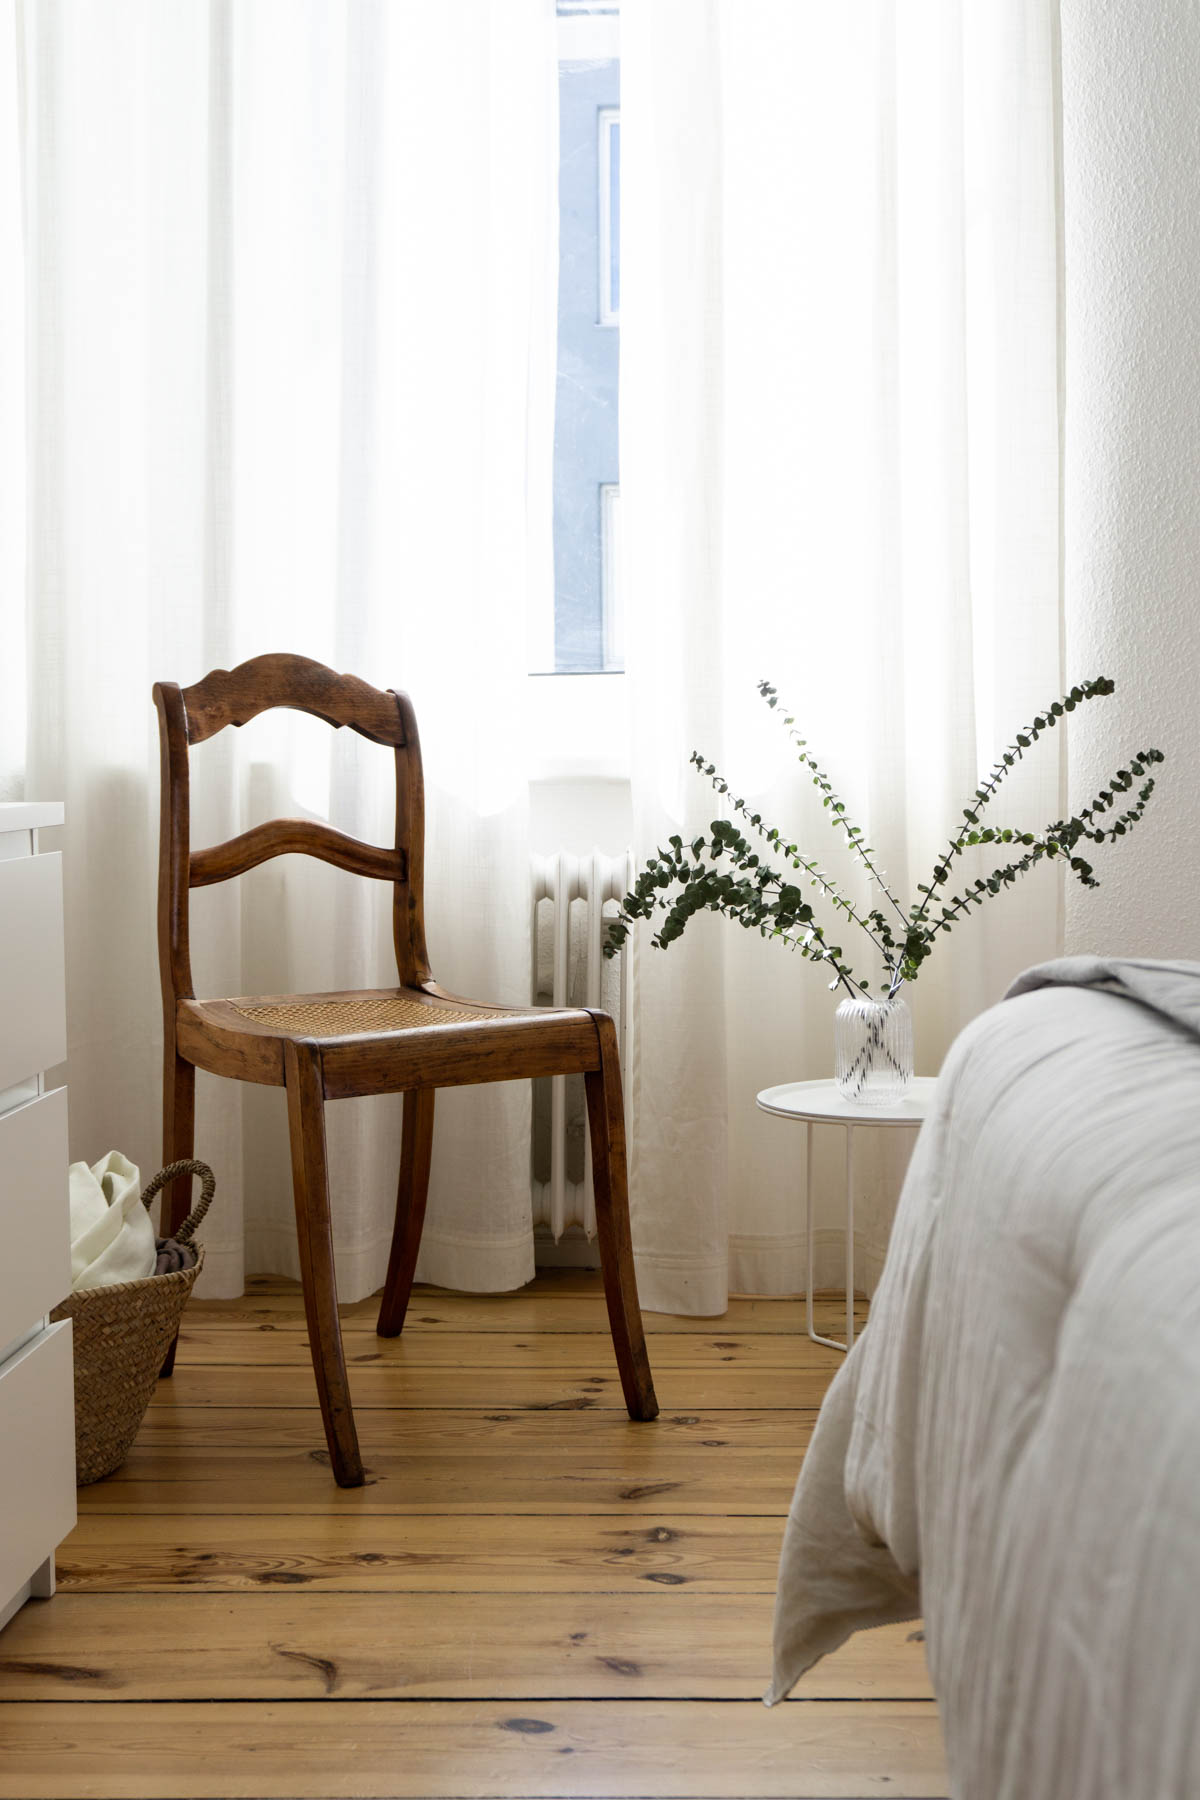 Vintage Cane Chair and Dried Eucalyptus - Scandinavian Interior Design - Bedroom Details - RG Daily Blog